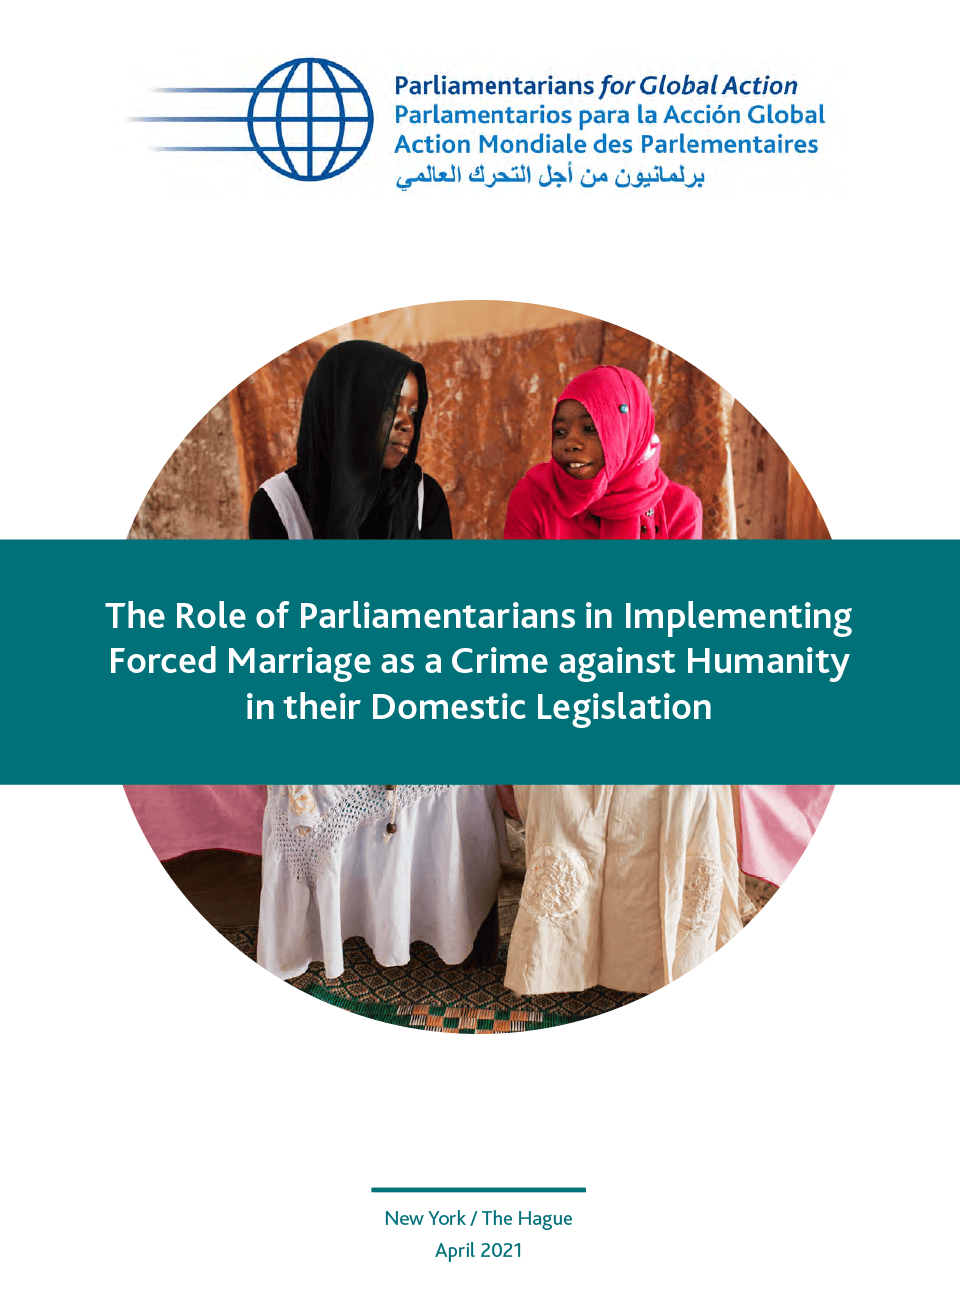 The Role of Parliamentarians in Implementing Forced Marriage as a Crime against Humanity in their Domestic Legislation